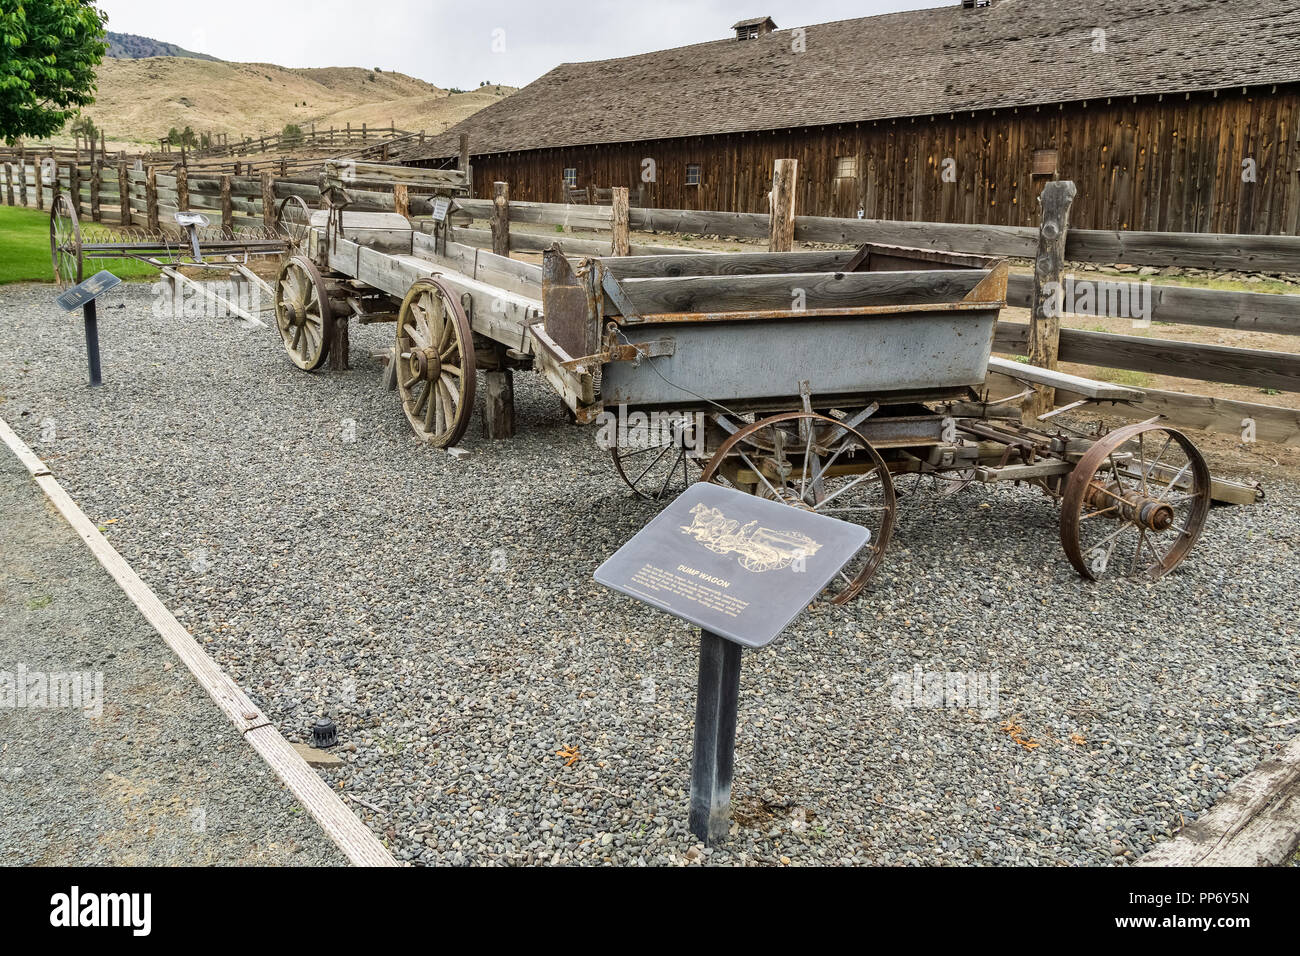 Old wooden cart and dump wagon at the Cant Ranch in John Day Fossil Beds National Monument, Dayville, Central Oregon, USA. Stock Photo